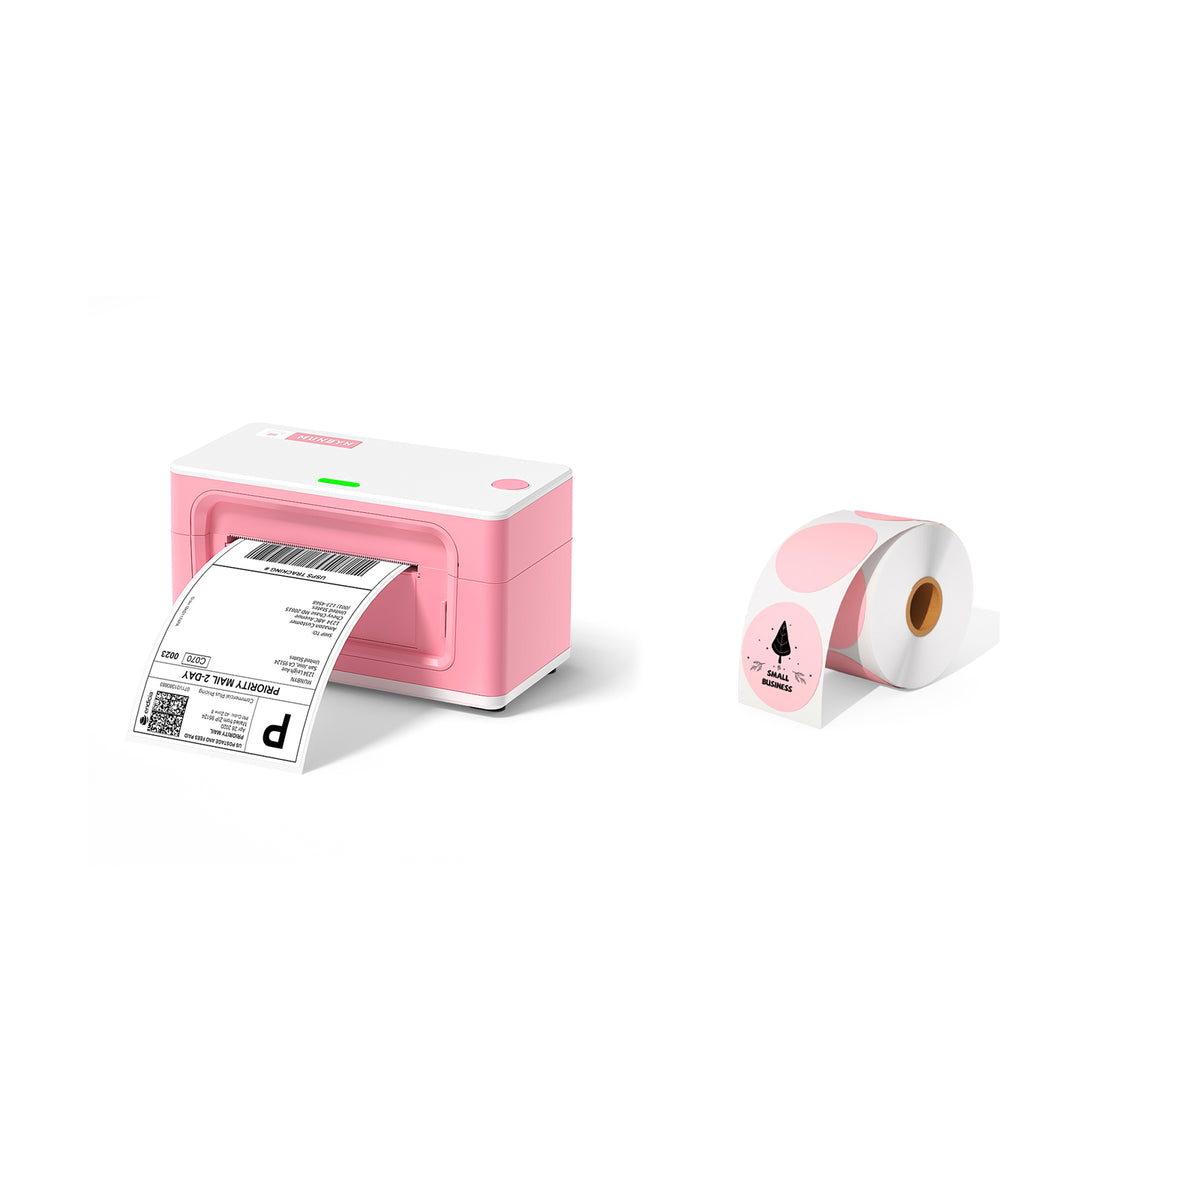 The MUNBYN P941 Pro Printer Kit includes a printer and a roll of pink circle labels.